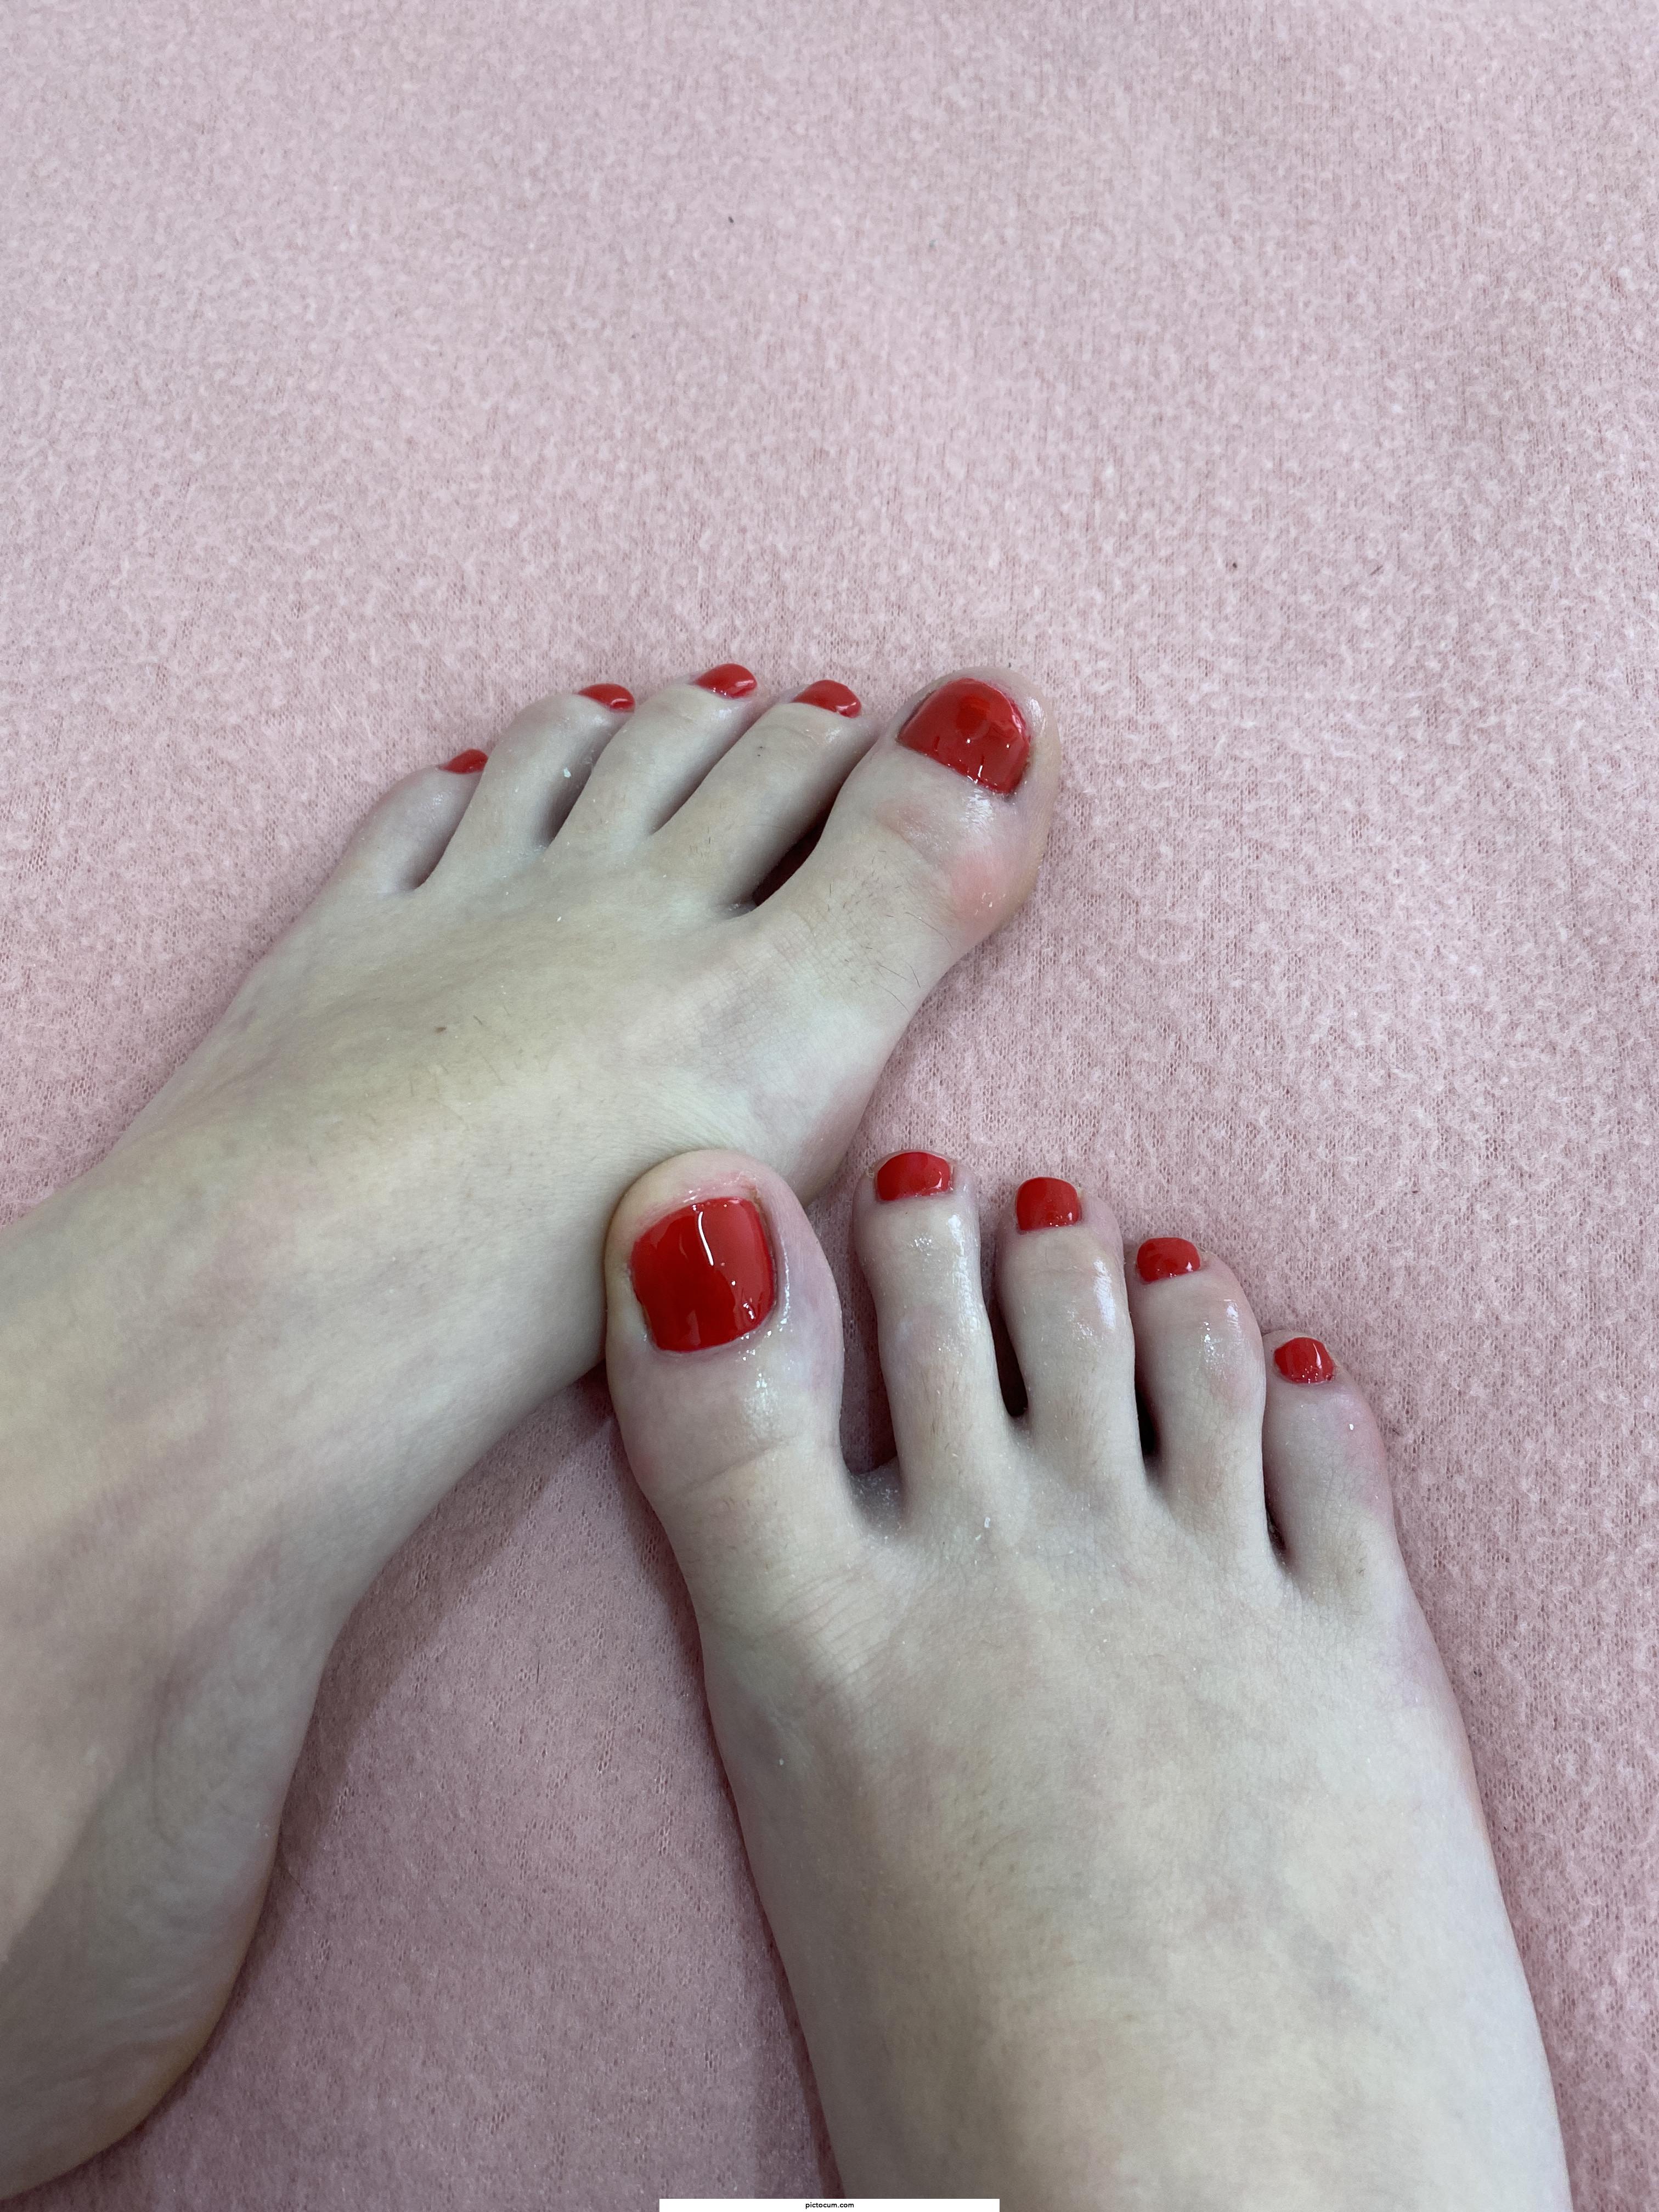 red pedicure looks very sexy and very erotic